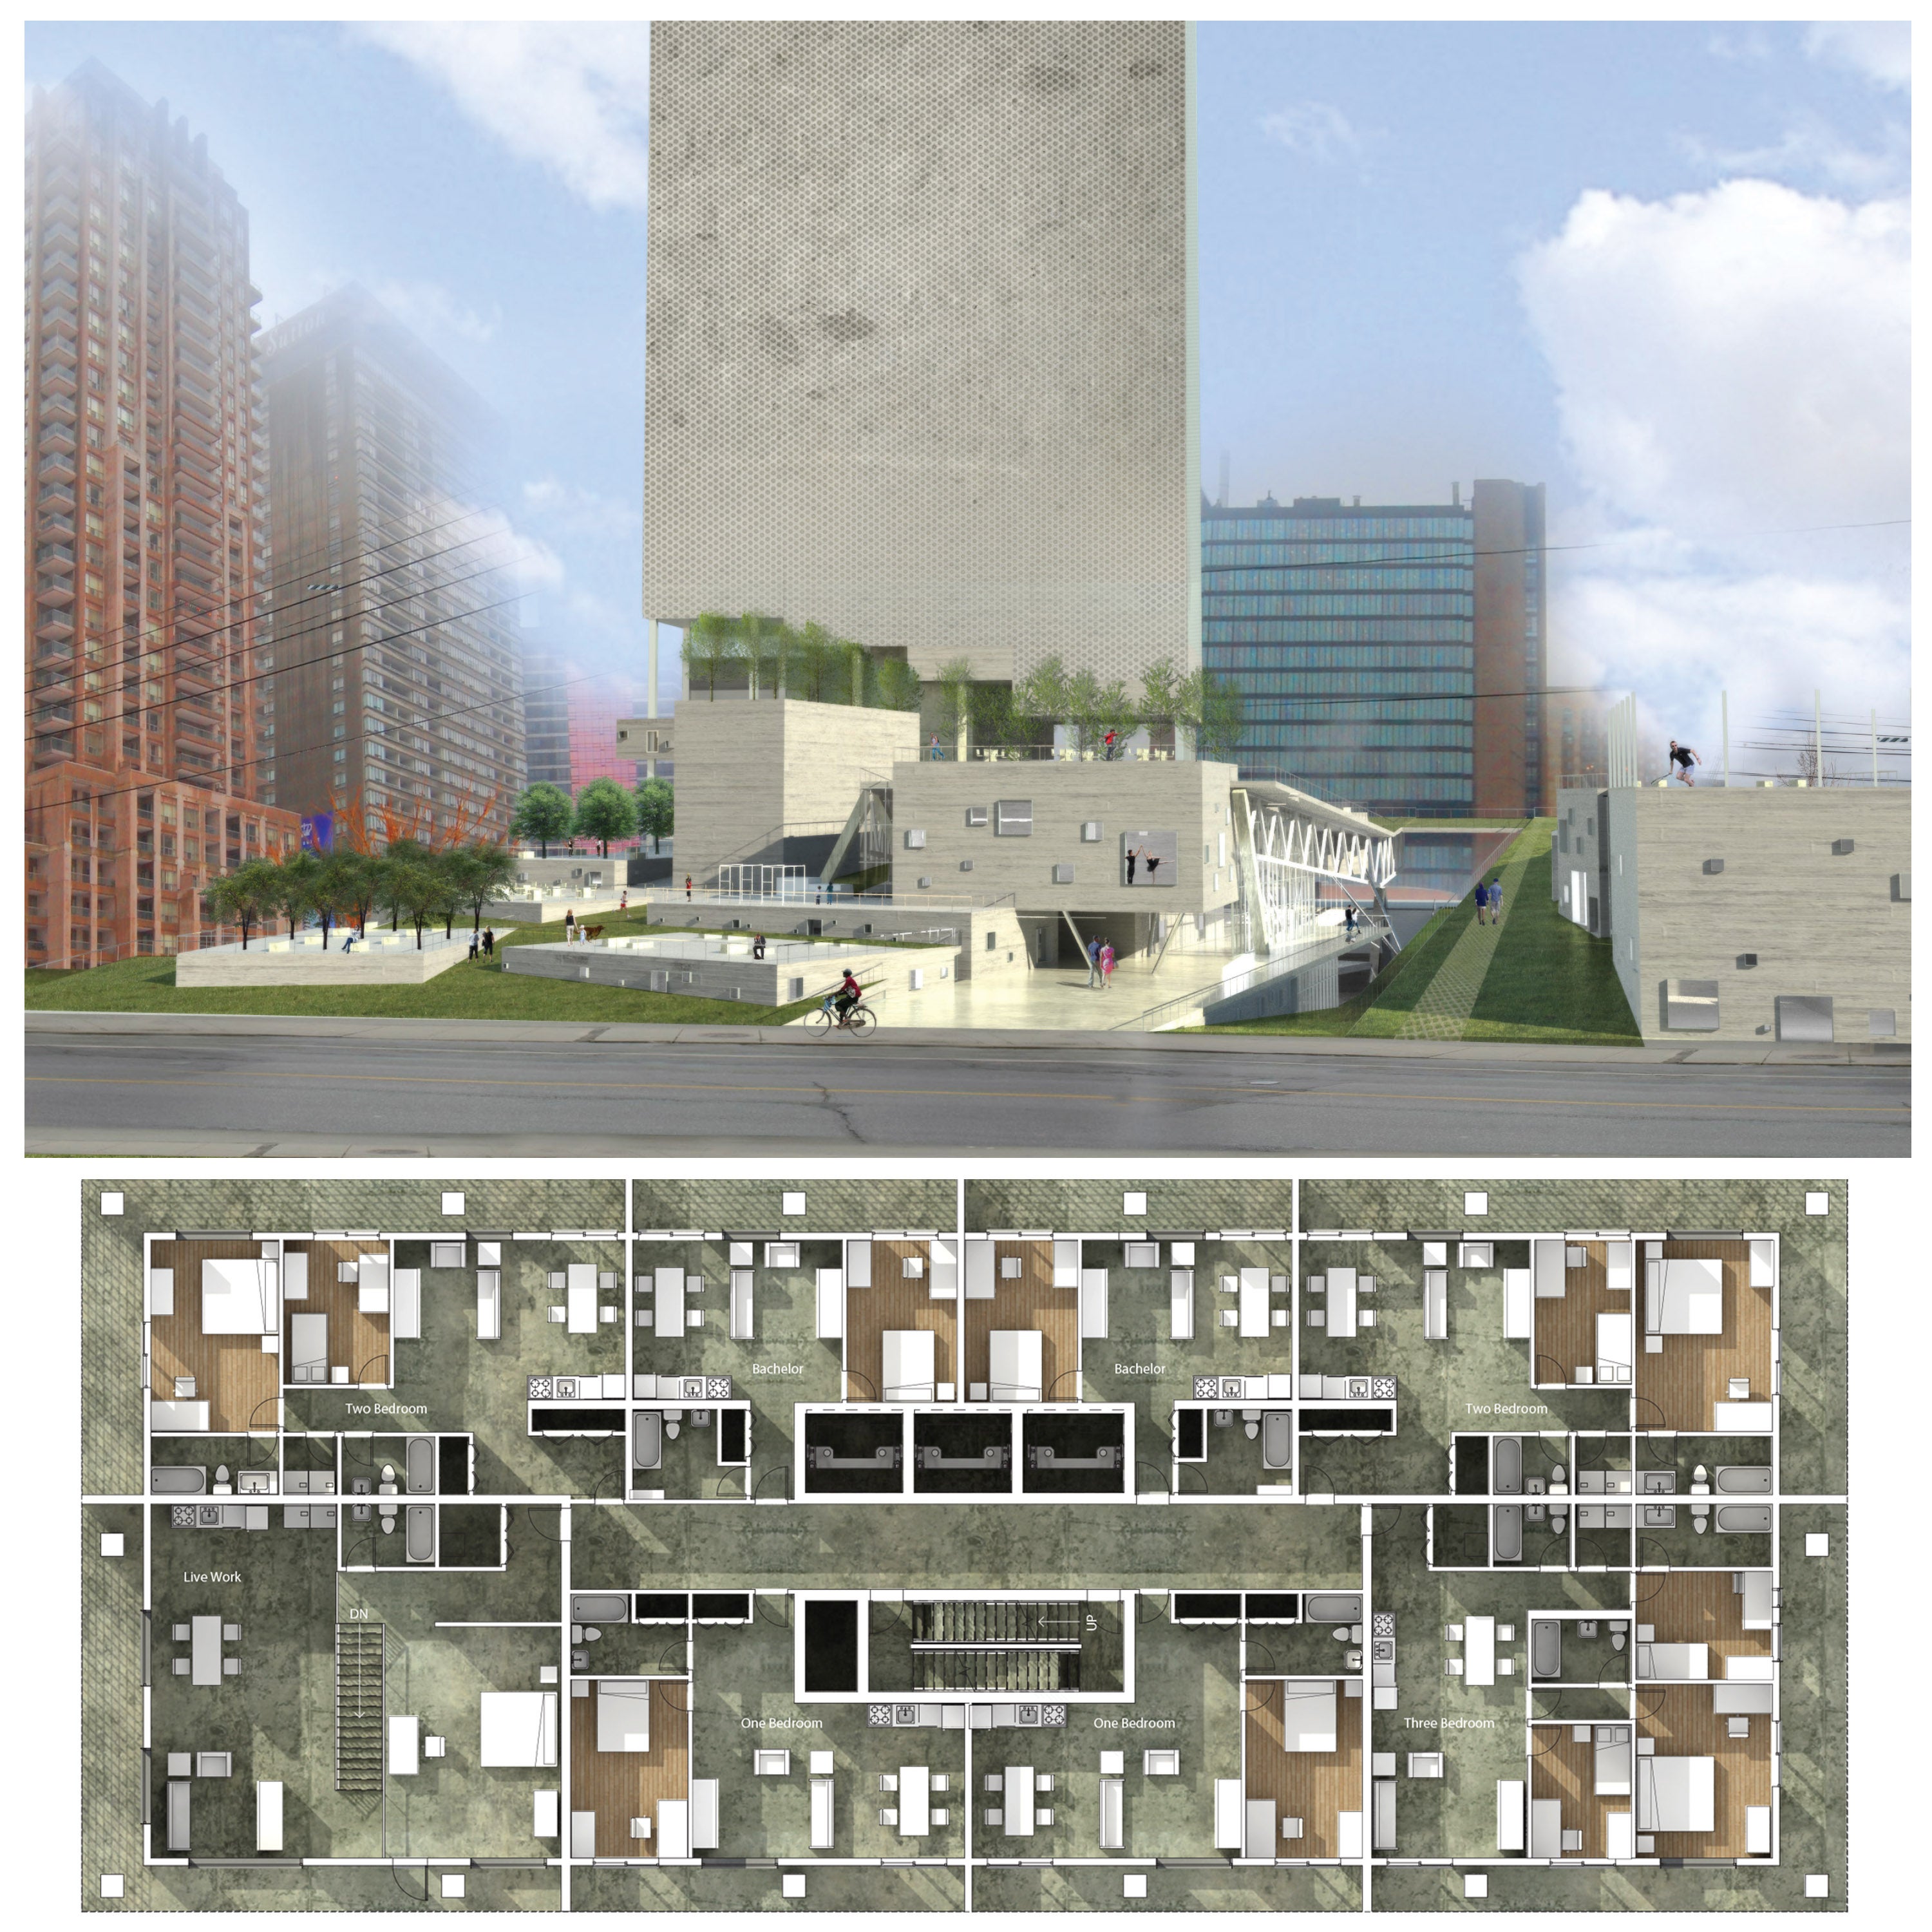 An exterior rendering of the building from street level. The main tower of the structure seems to be cladded in a thin mesh.